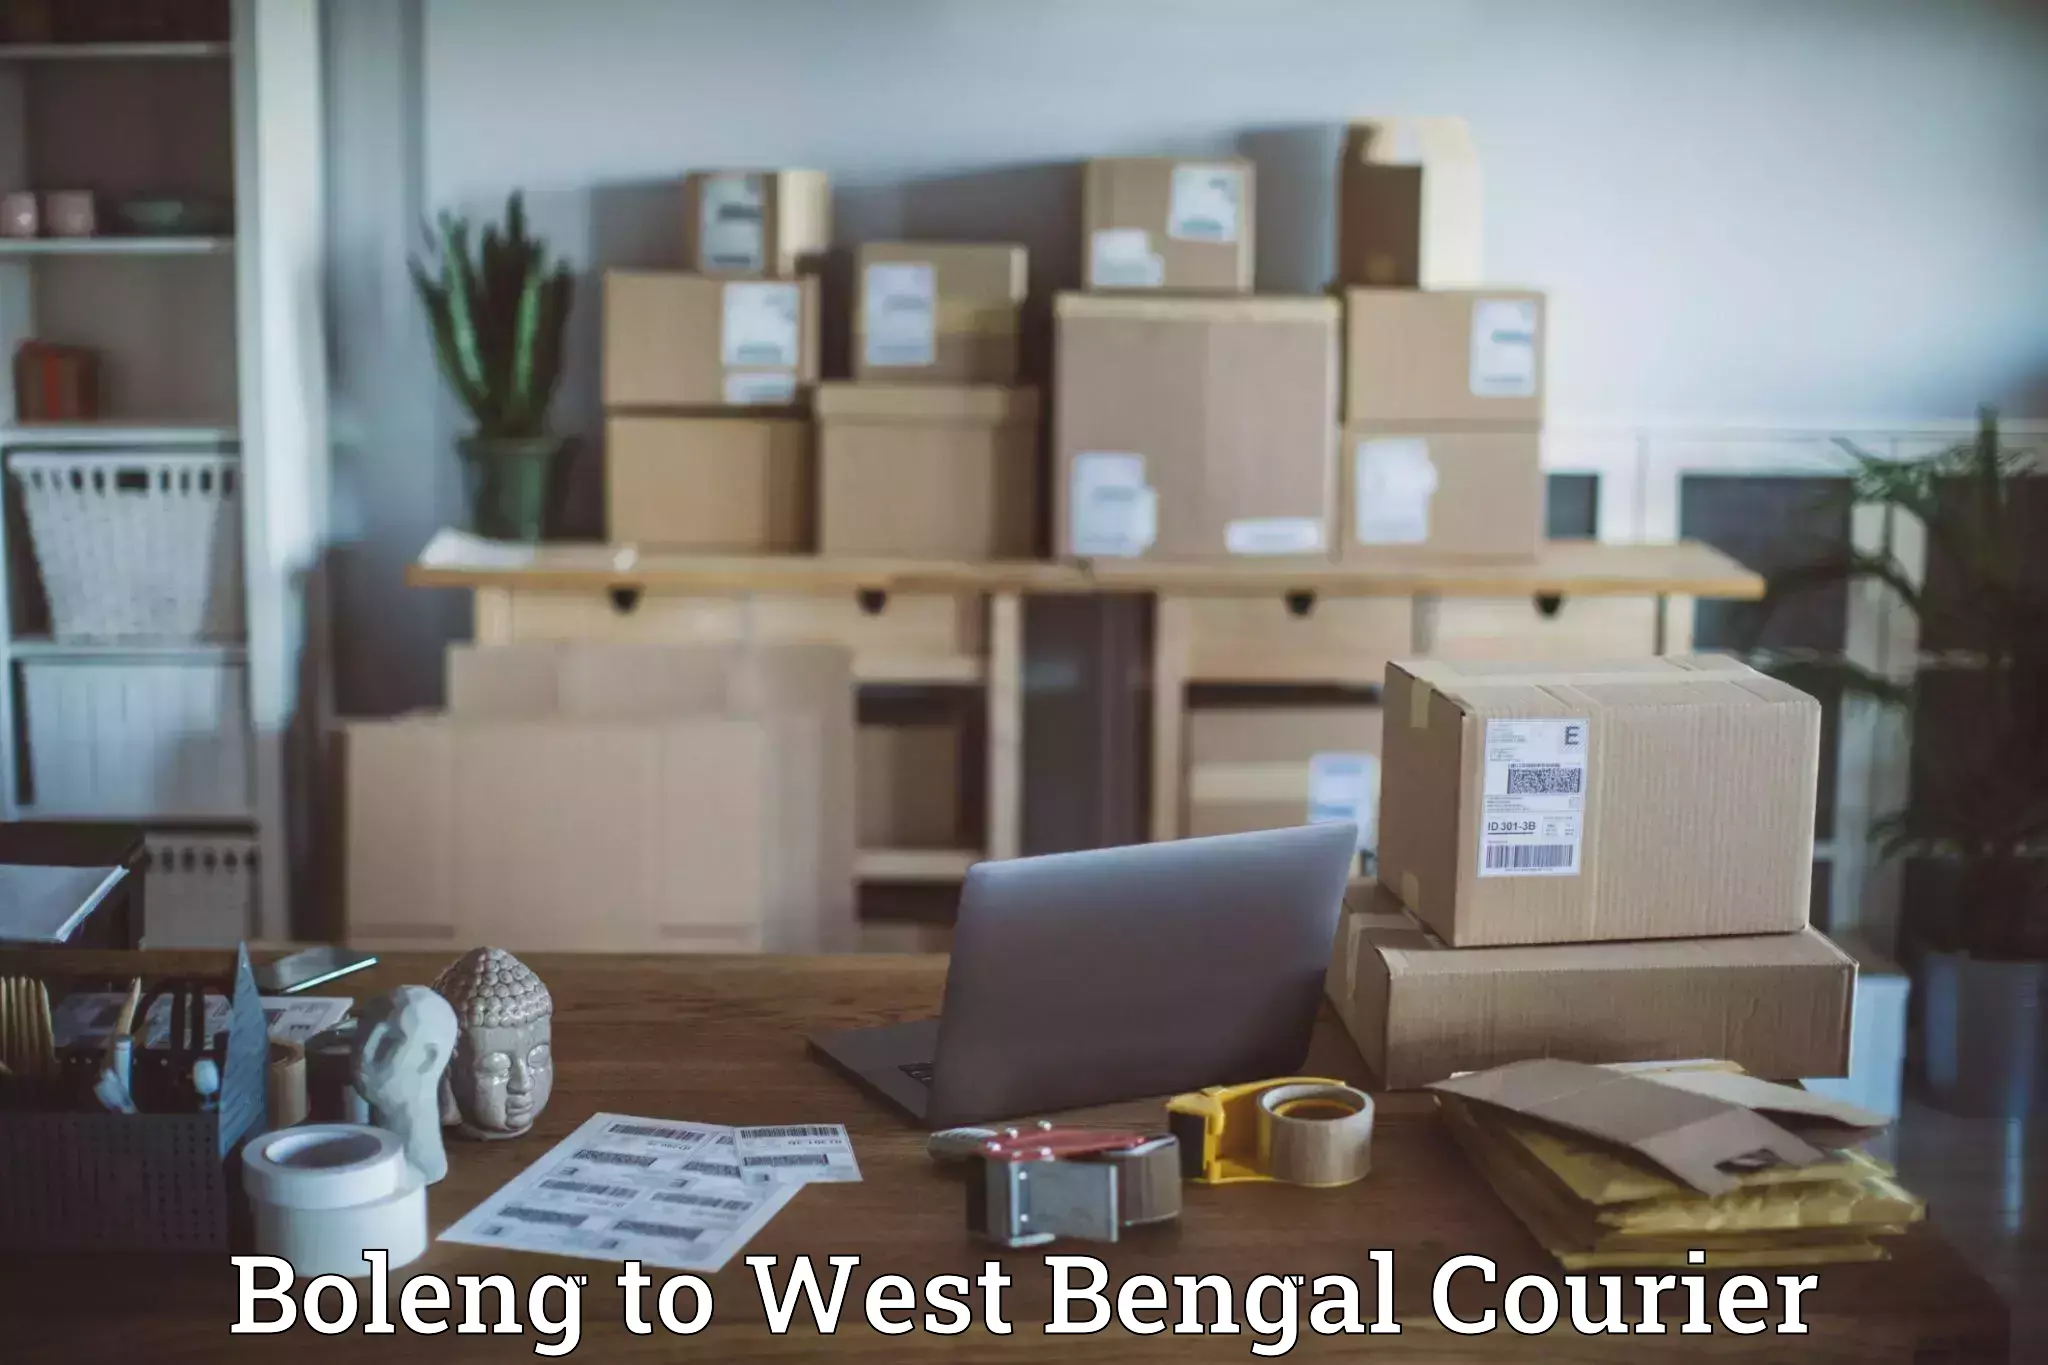 Parcel service for businesses Boleng to West Bengal